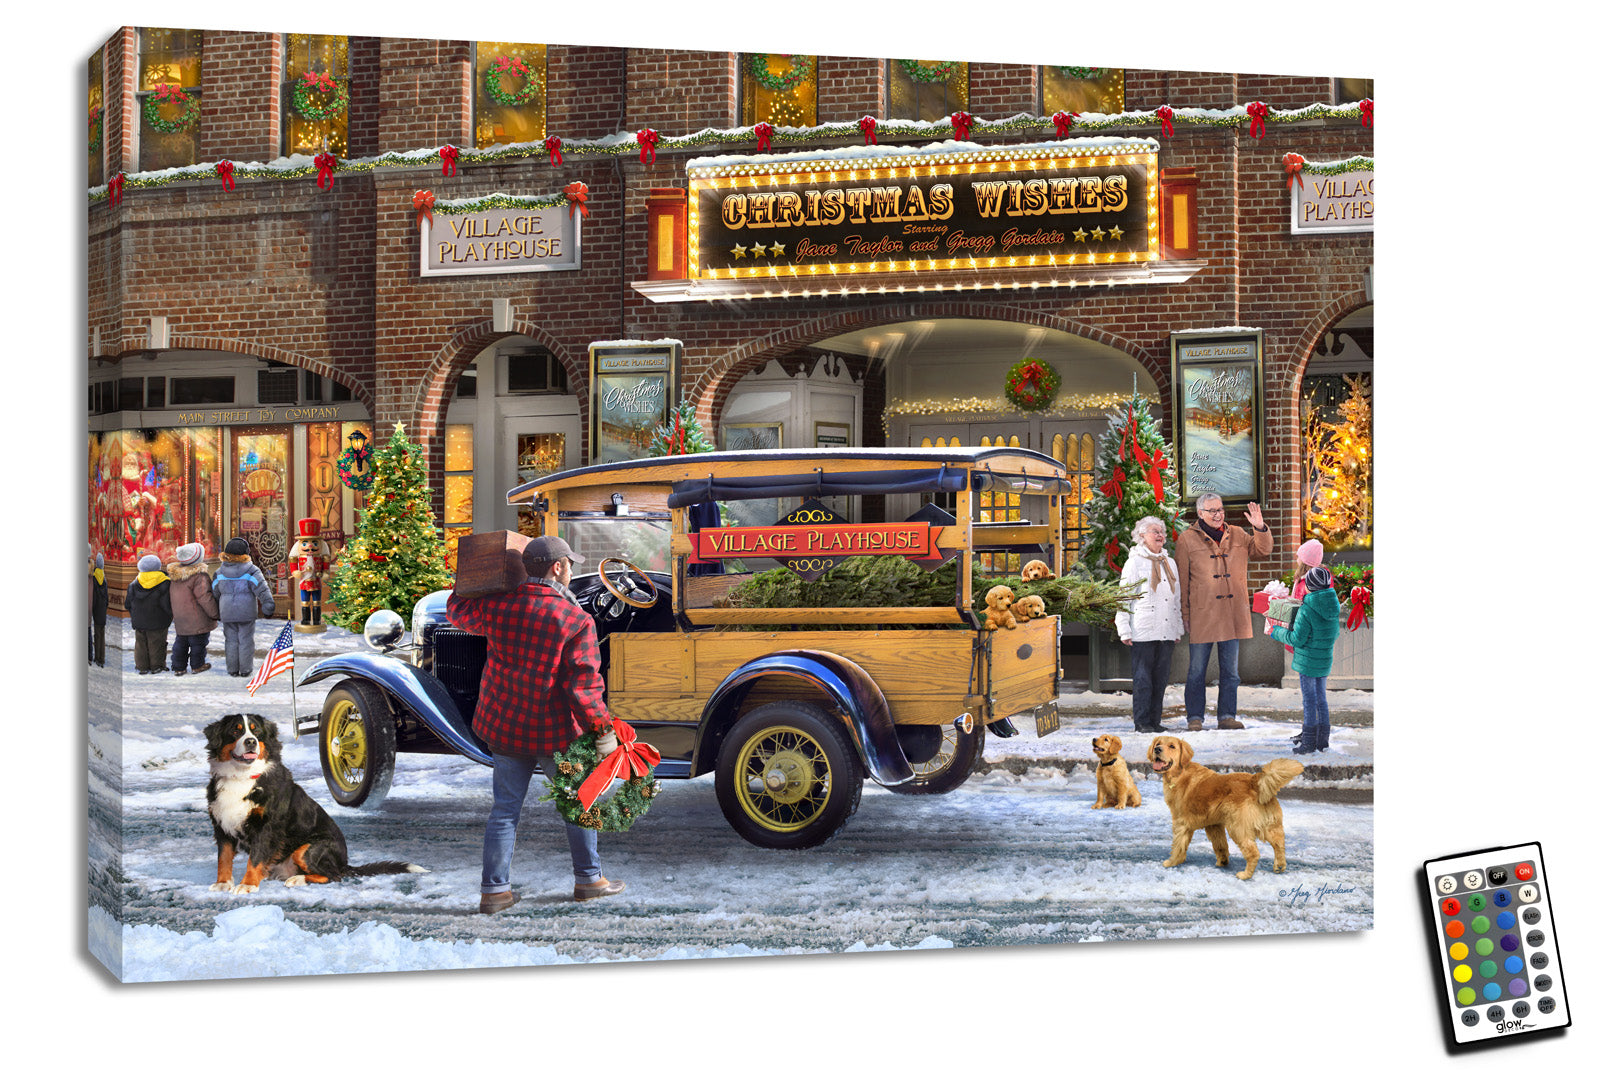  This charming piece of art features an old-time yellow truck parked in front of a bustling small-town theatre, beautifully decorated with twinkling lights and wreaths.